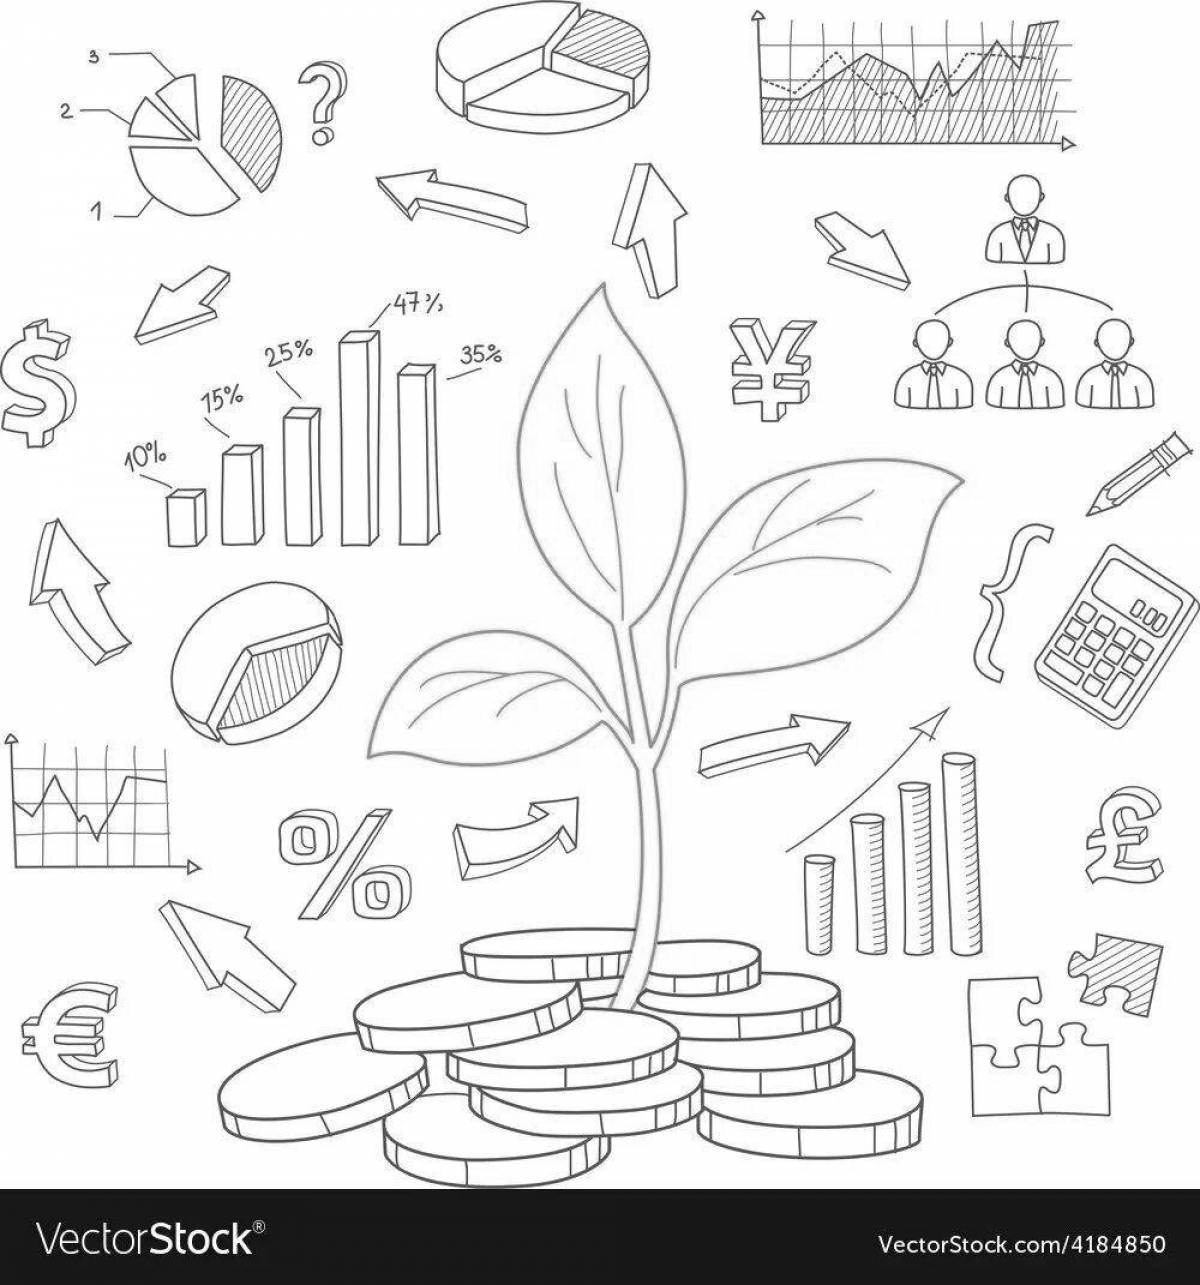 Fun coloring book on financial literacy for elementary school kids